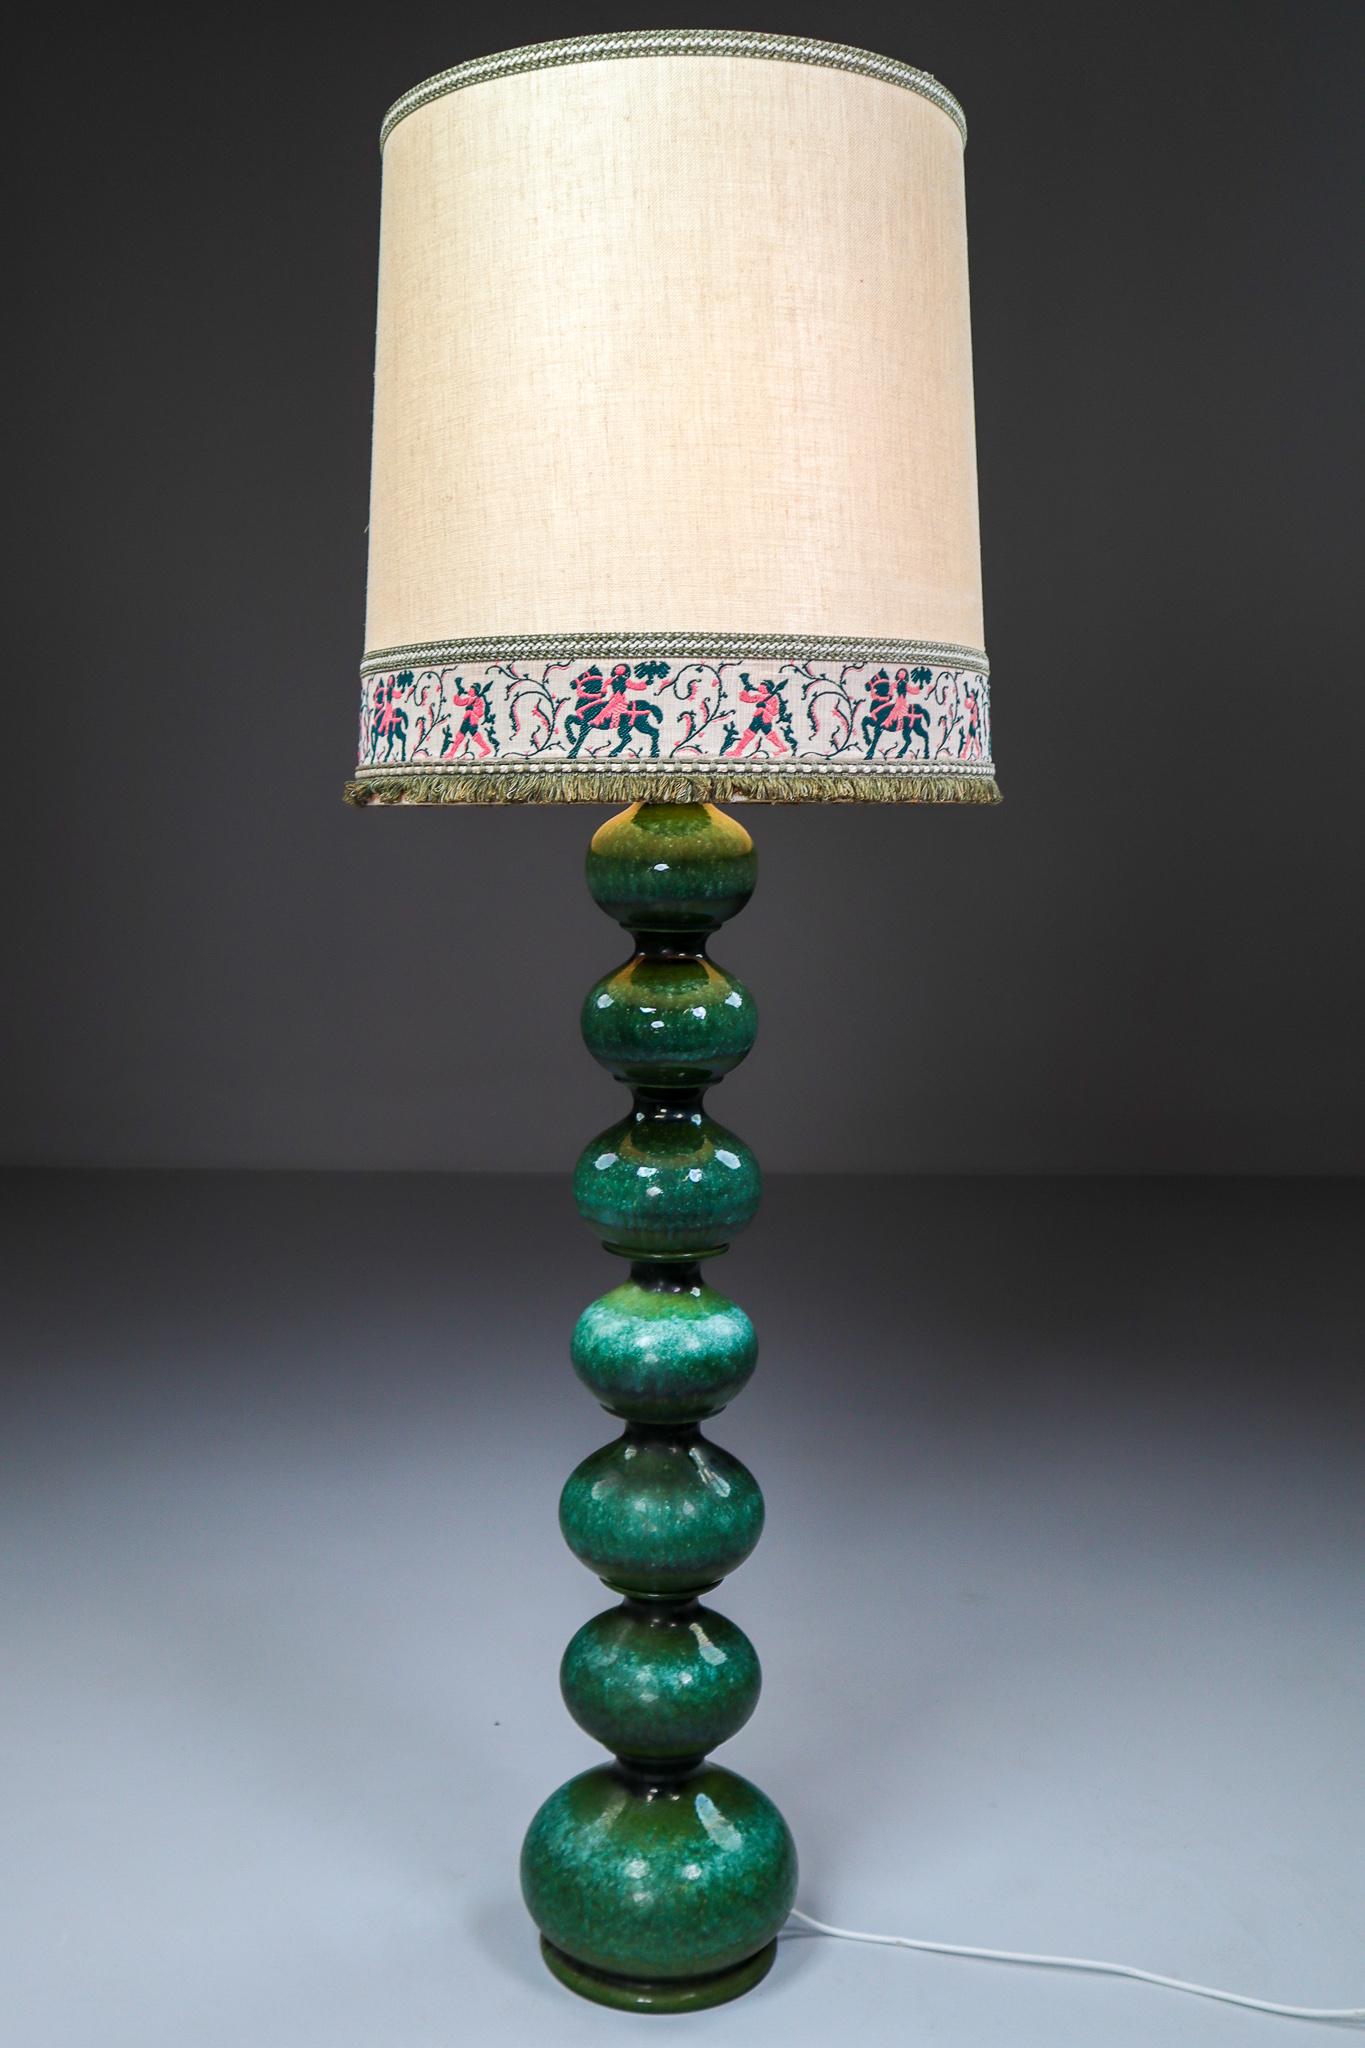 Exceptional ceramic bubble floor lamp made in Germany by Kaiser Leuchten, 1960s. Beautiful sculptural piece made of handmade ceramic in rich glazed green tones. Original lampshade with embroidered design. The light is compatible with the US/UK/